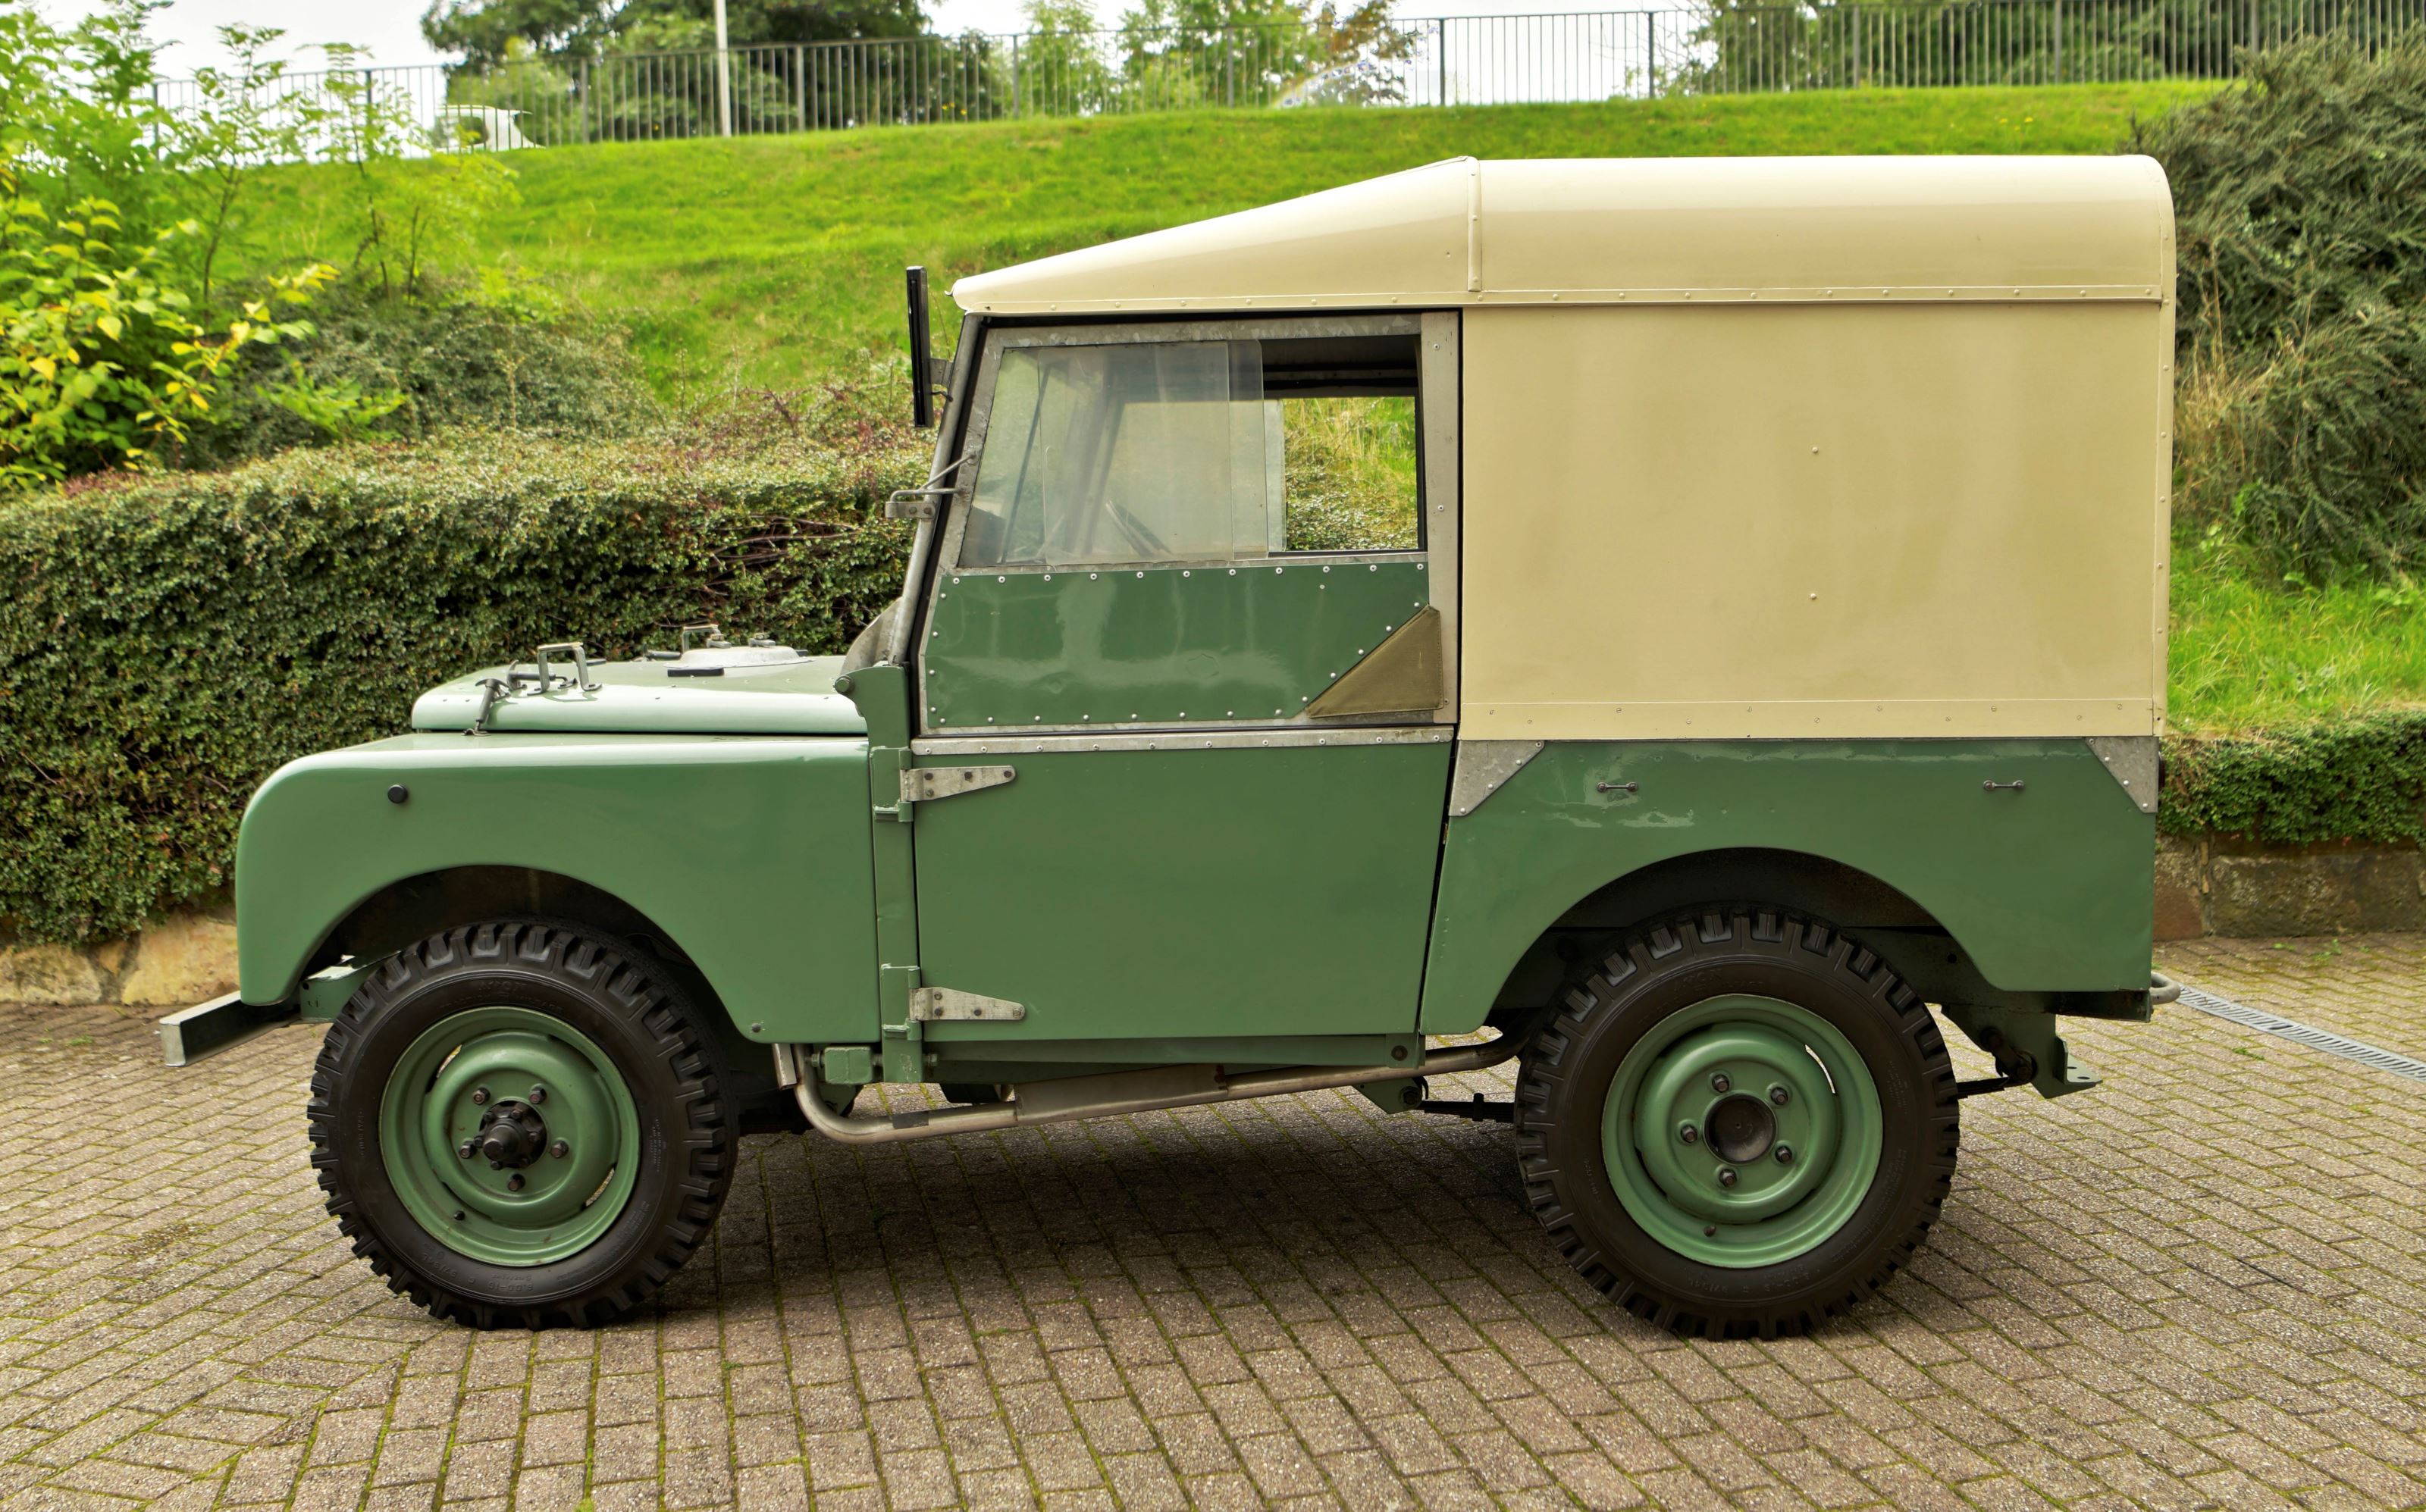 Land rover series 1 swb with hard top cszswxuoe3hs sy6cex7p